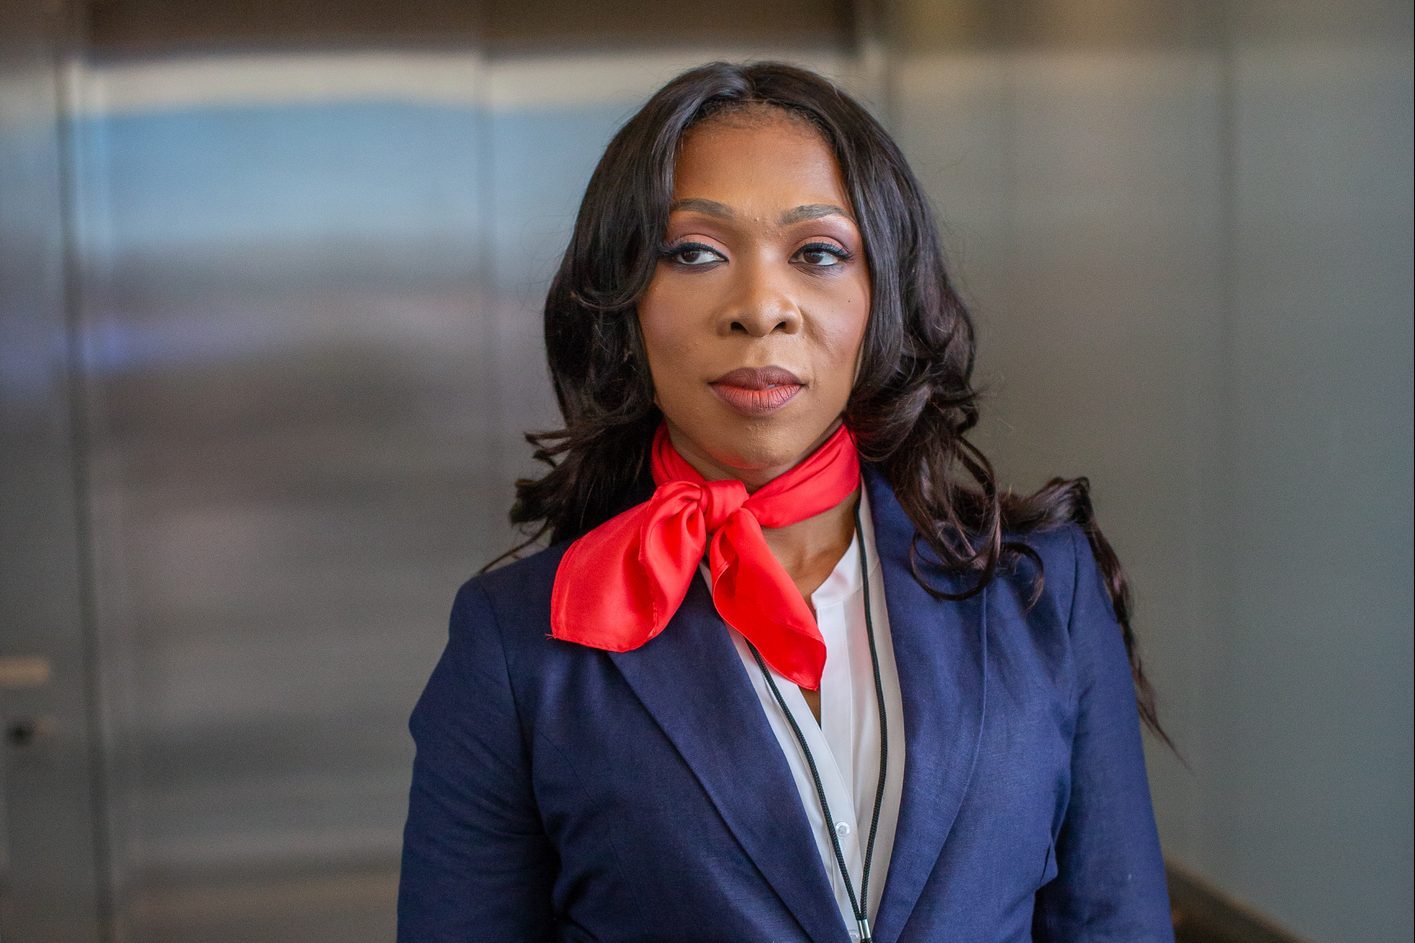 Airline flight attendant stands in airport elevator.